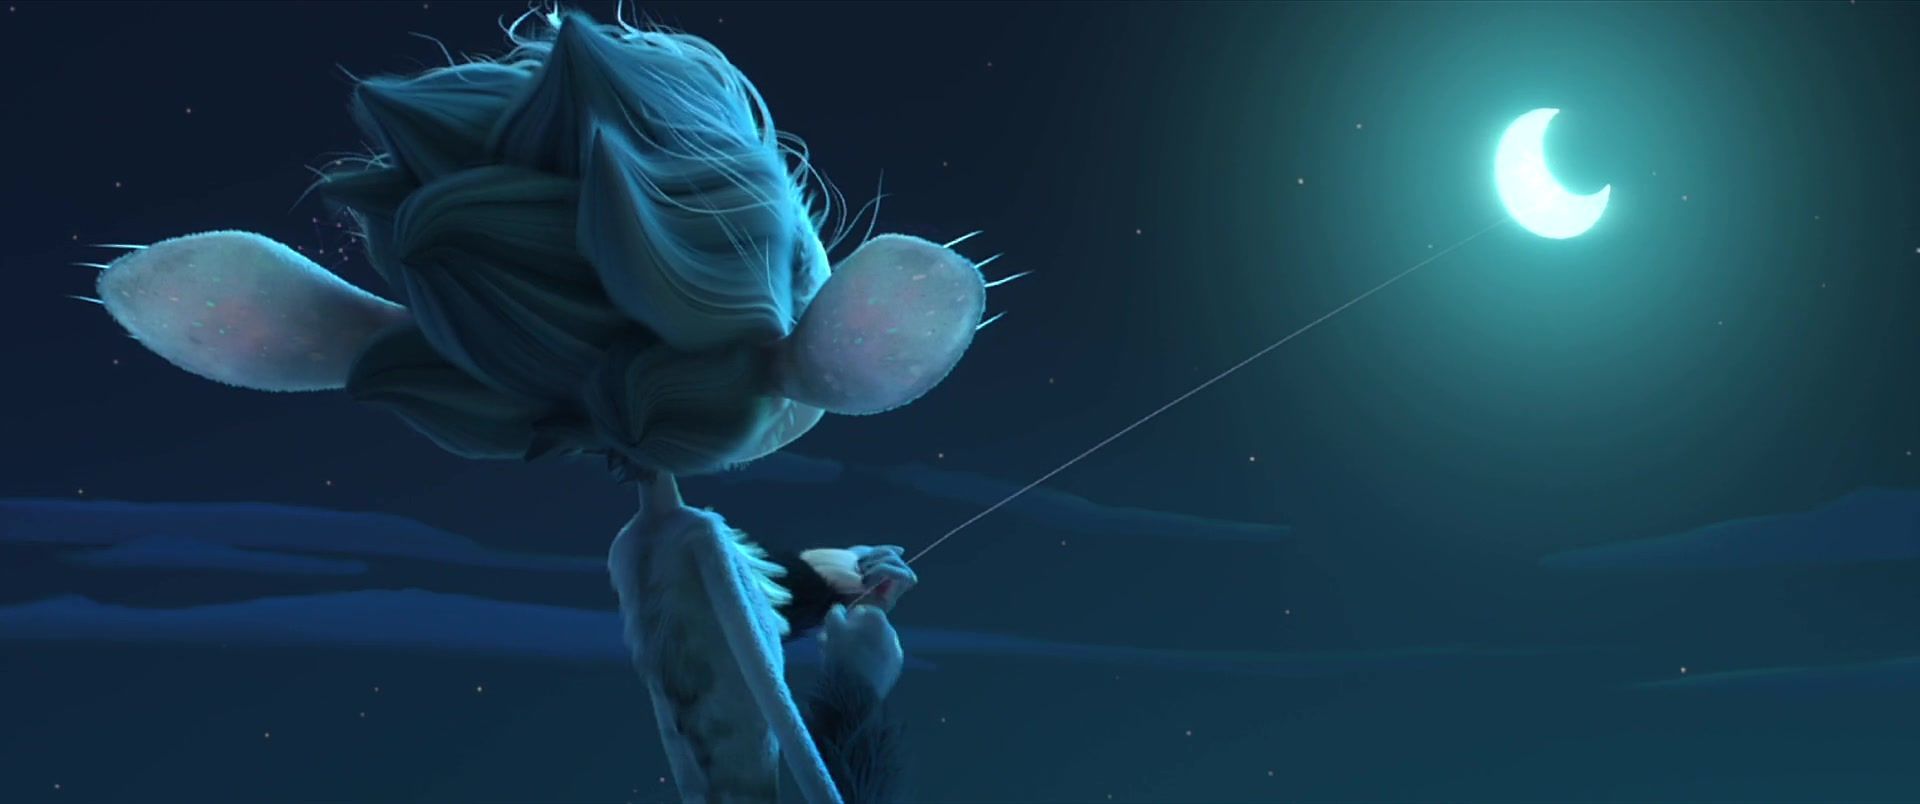 Image For Mune: Guardian of the Moon. Fancaps.net. Guardian of the moon, Wallpaper, Guardian